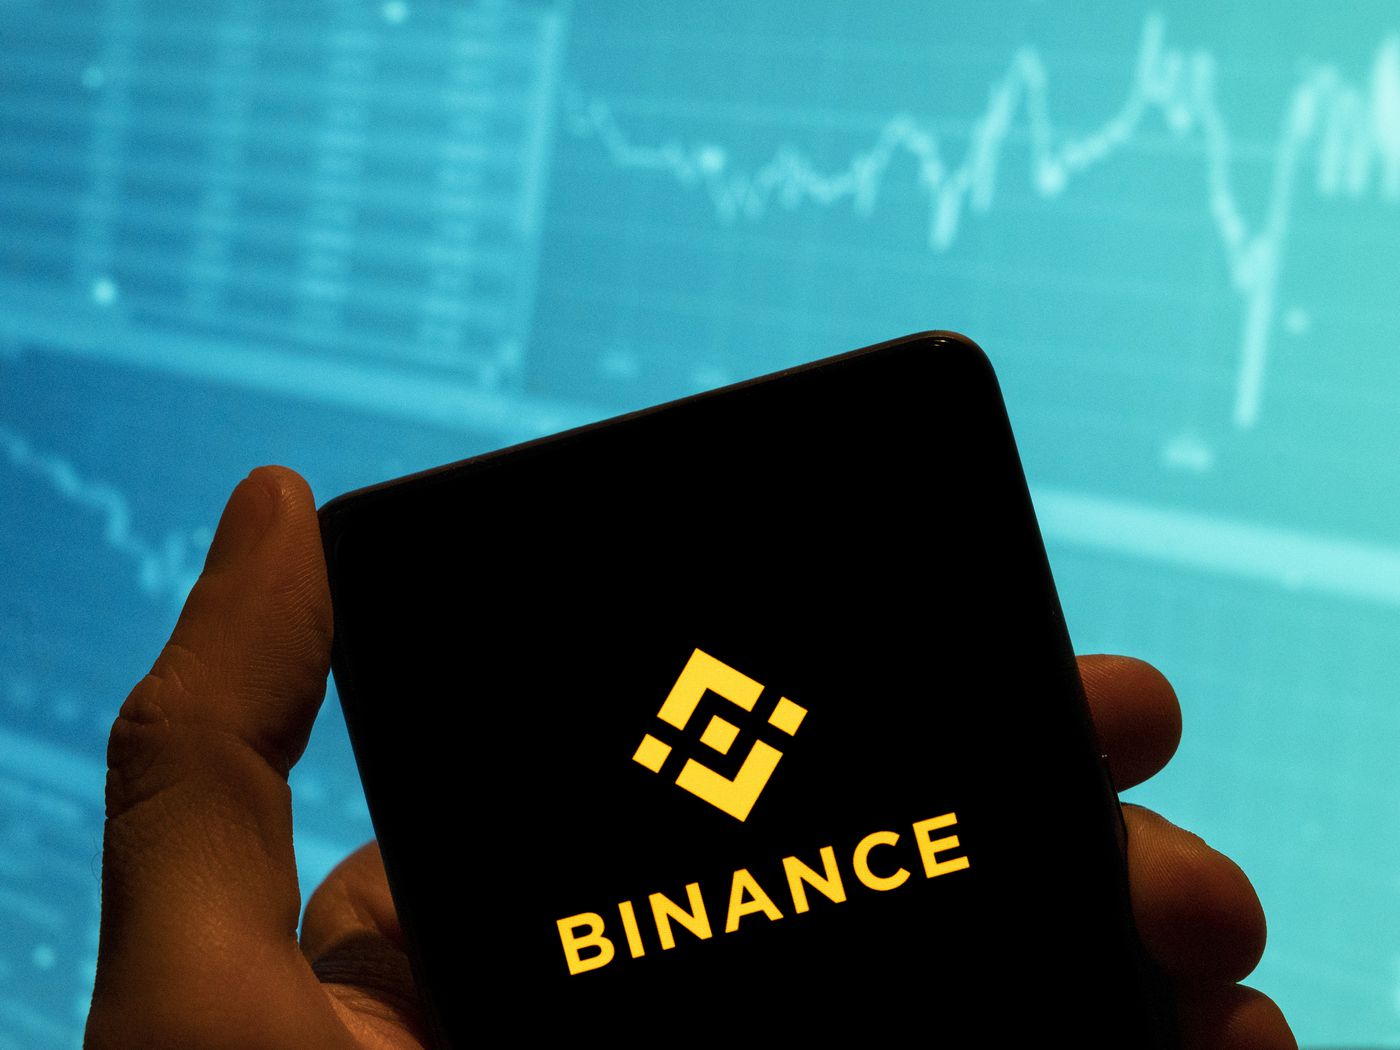 Binance To Pay $4.3B In Fines And CEO ‘CZ’ To Step Down